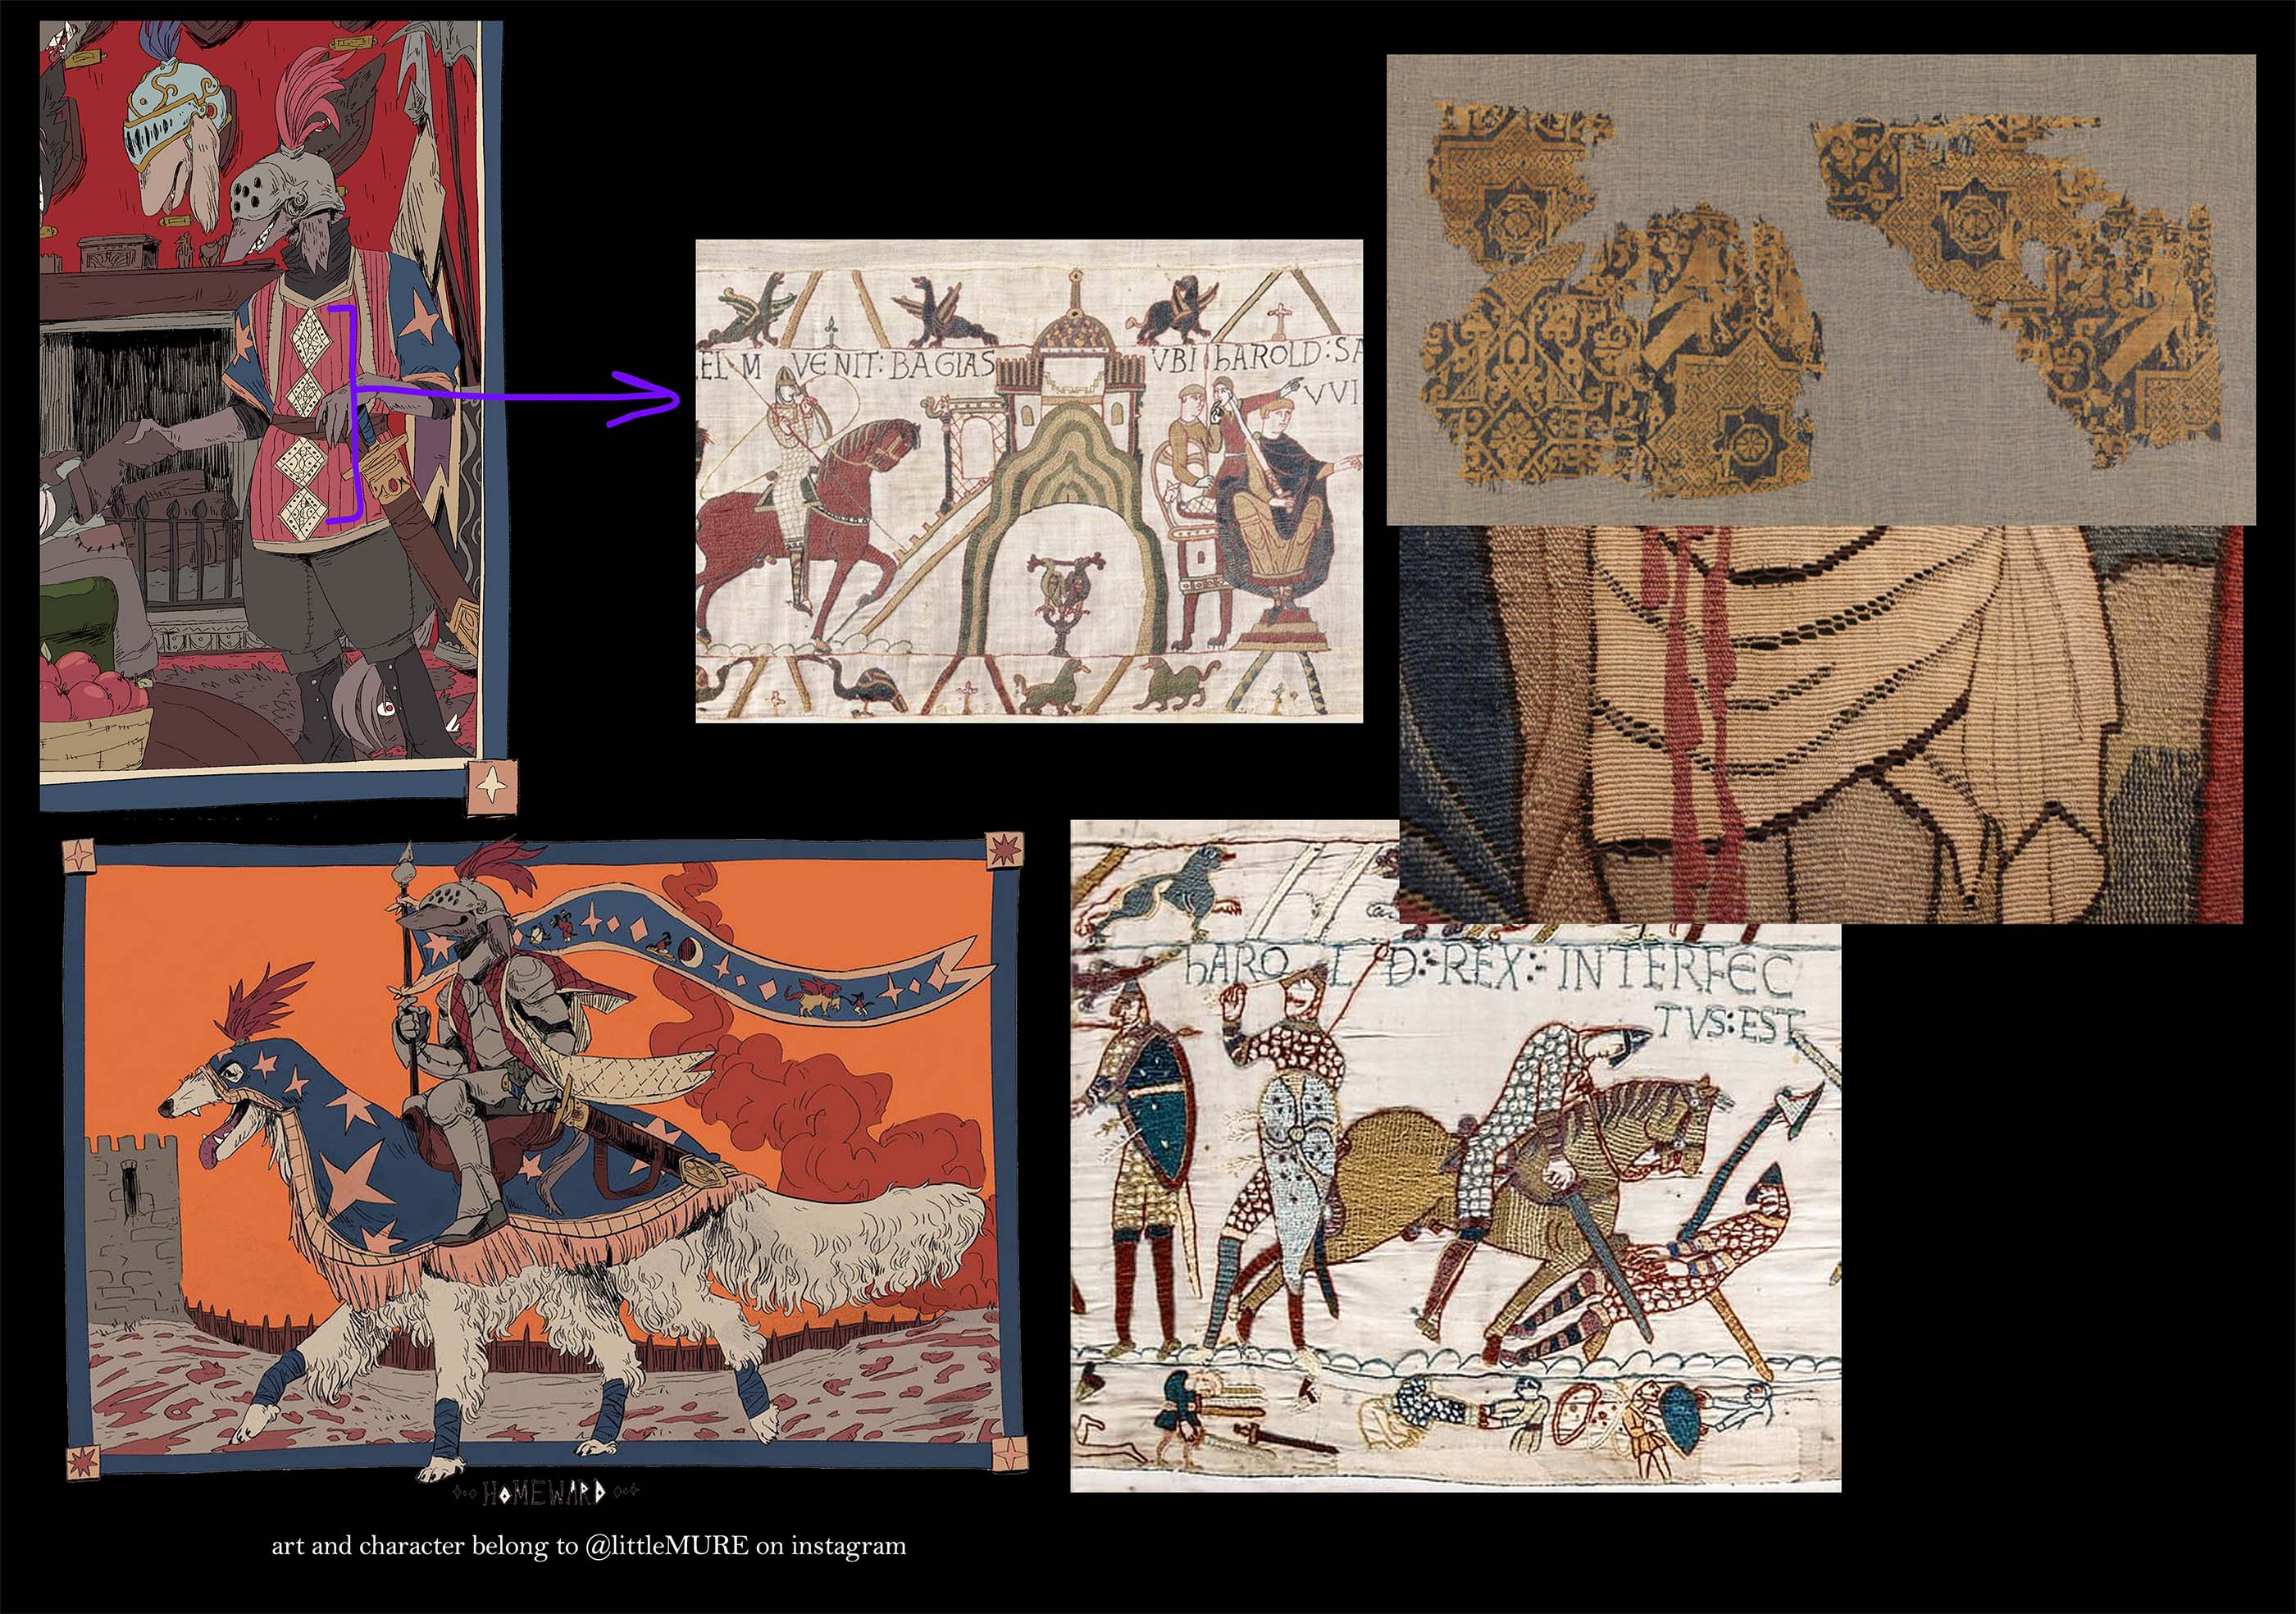 I started with some research into medieval textiles since they were such a big part of this project.  I was reminded of the Bayeaux Tapestry, which is where I drew inspiration for the patches on the front of the gambeson (quilted armor)